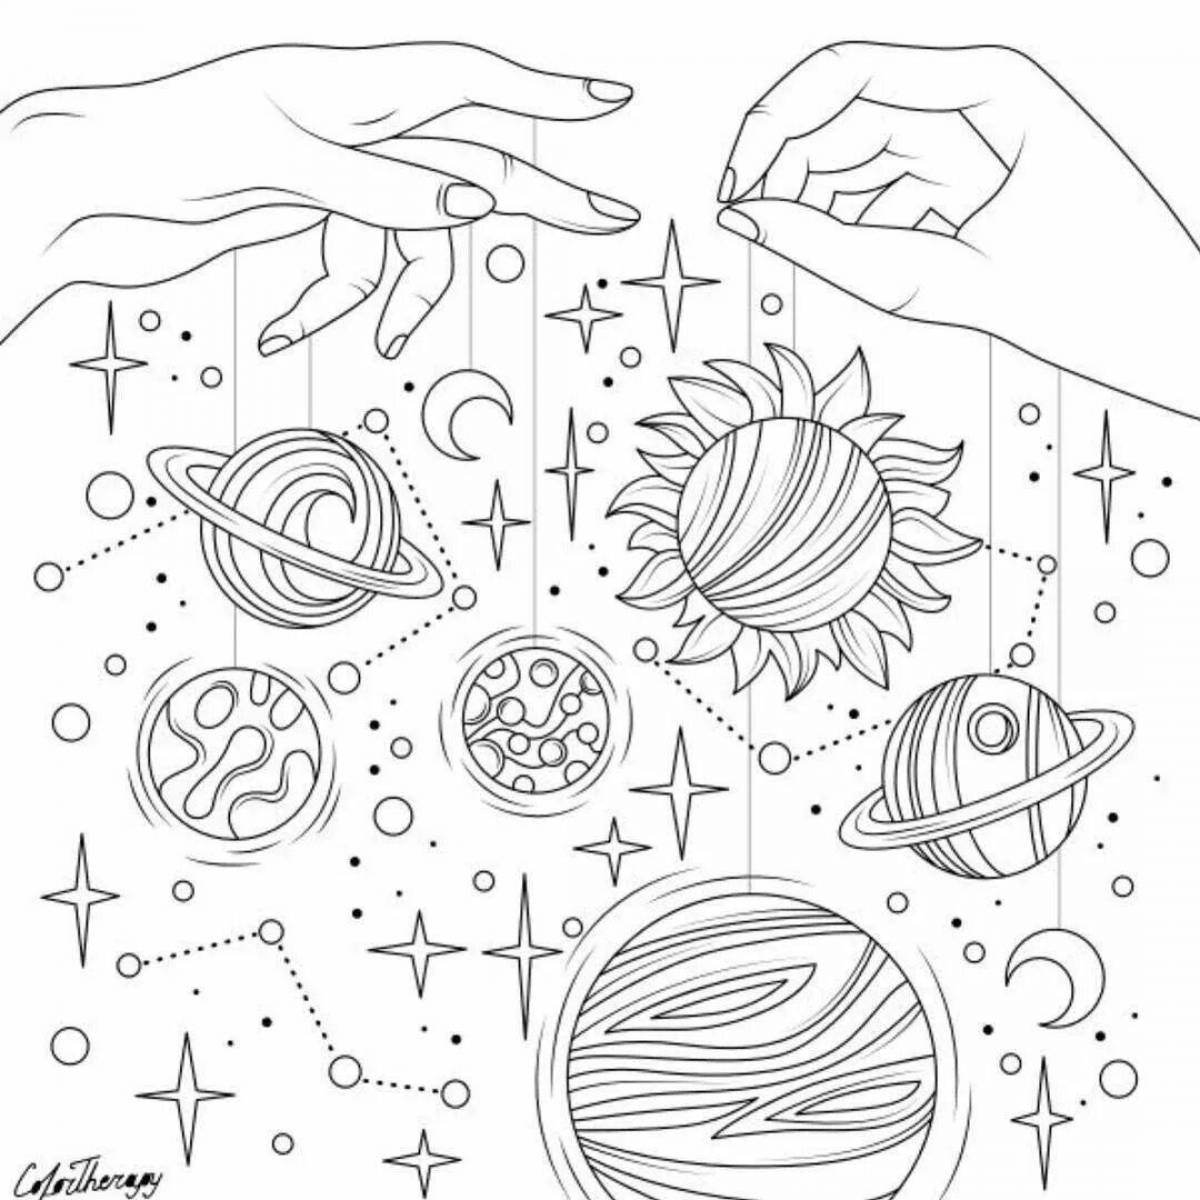 Majestic intergalactic space coloring page